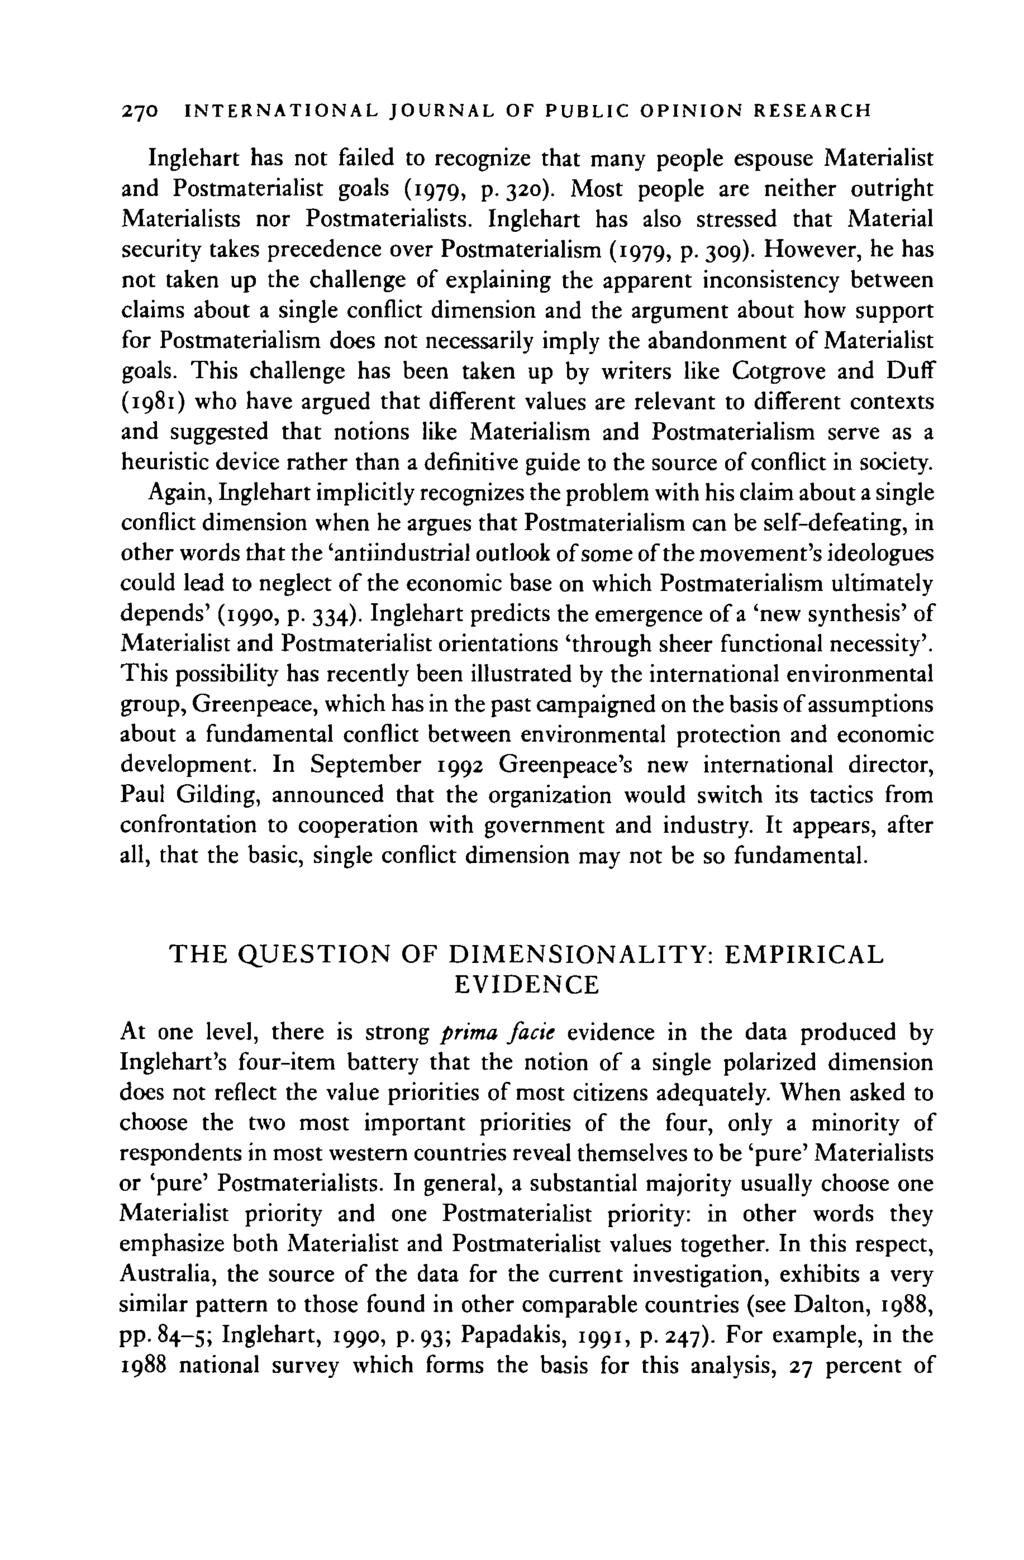 270 INTERNATIONAL JOURNAL OF PUBLIC OPINION RESEARCH Inglehart has not failed to recognize that many people espouse Materialist and Postmaterialist goals (1979, p. 320).